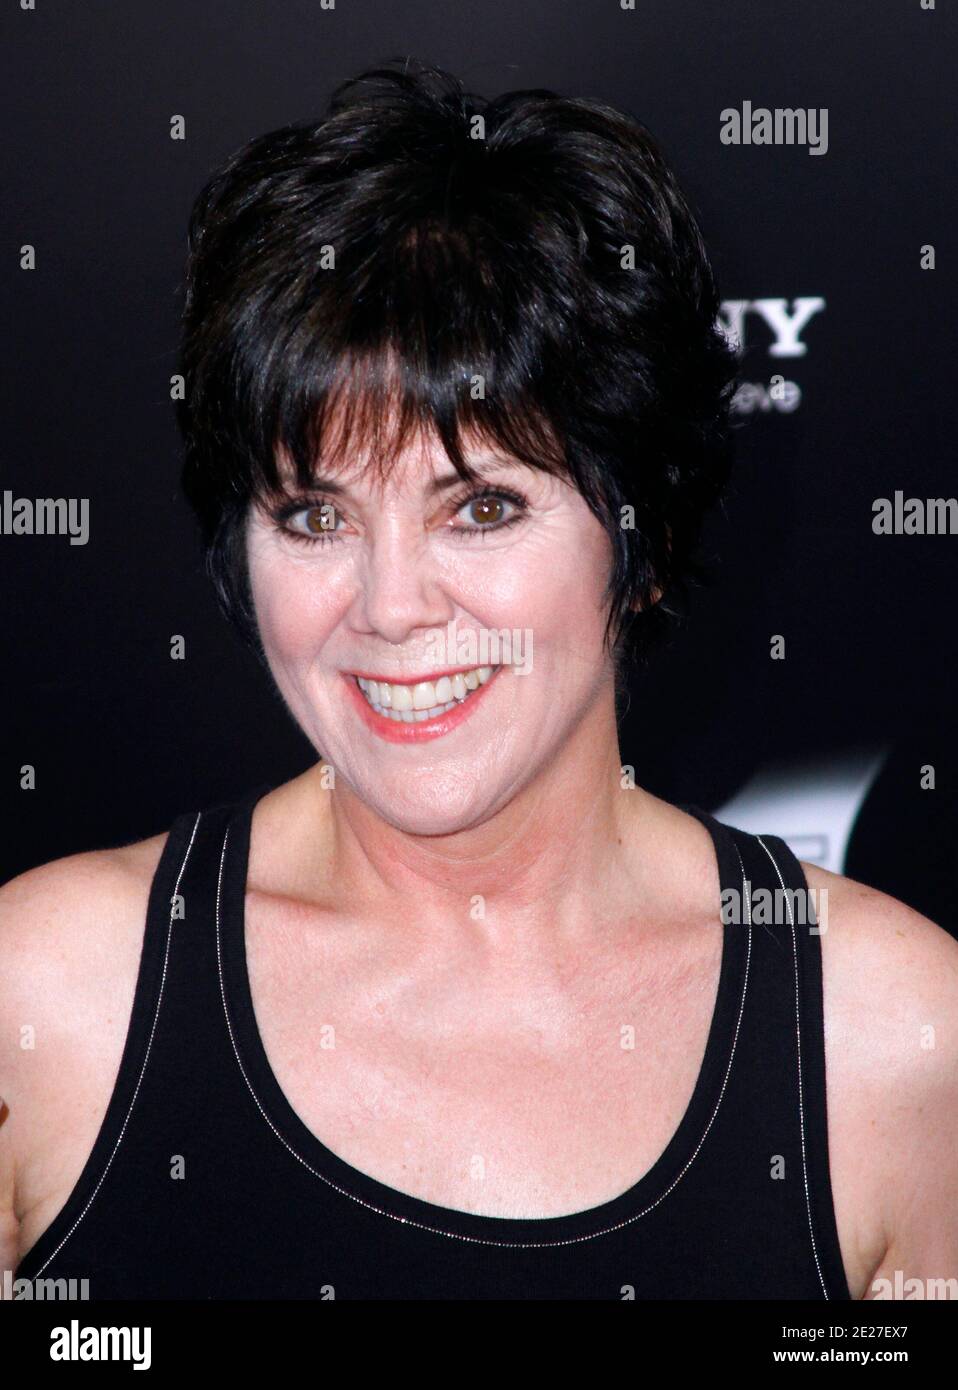 Joyce dewitt hires stock photography and images Alamy